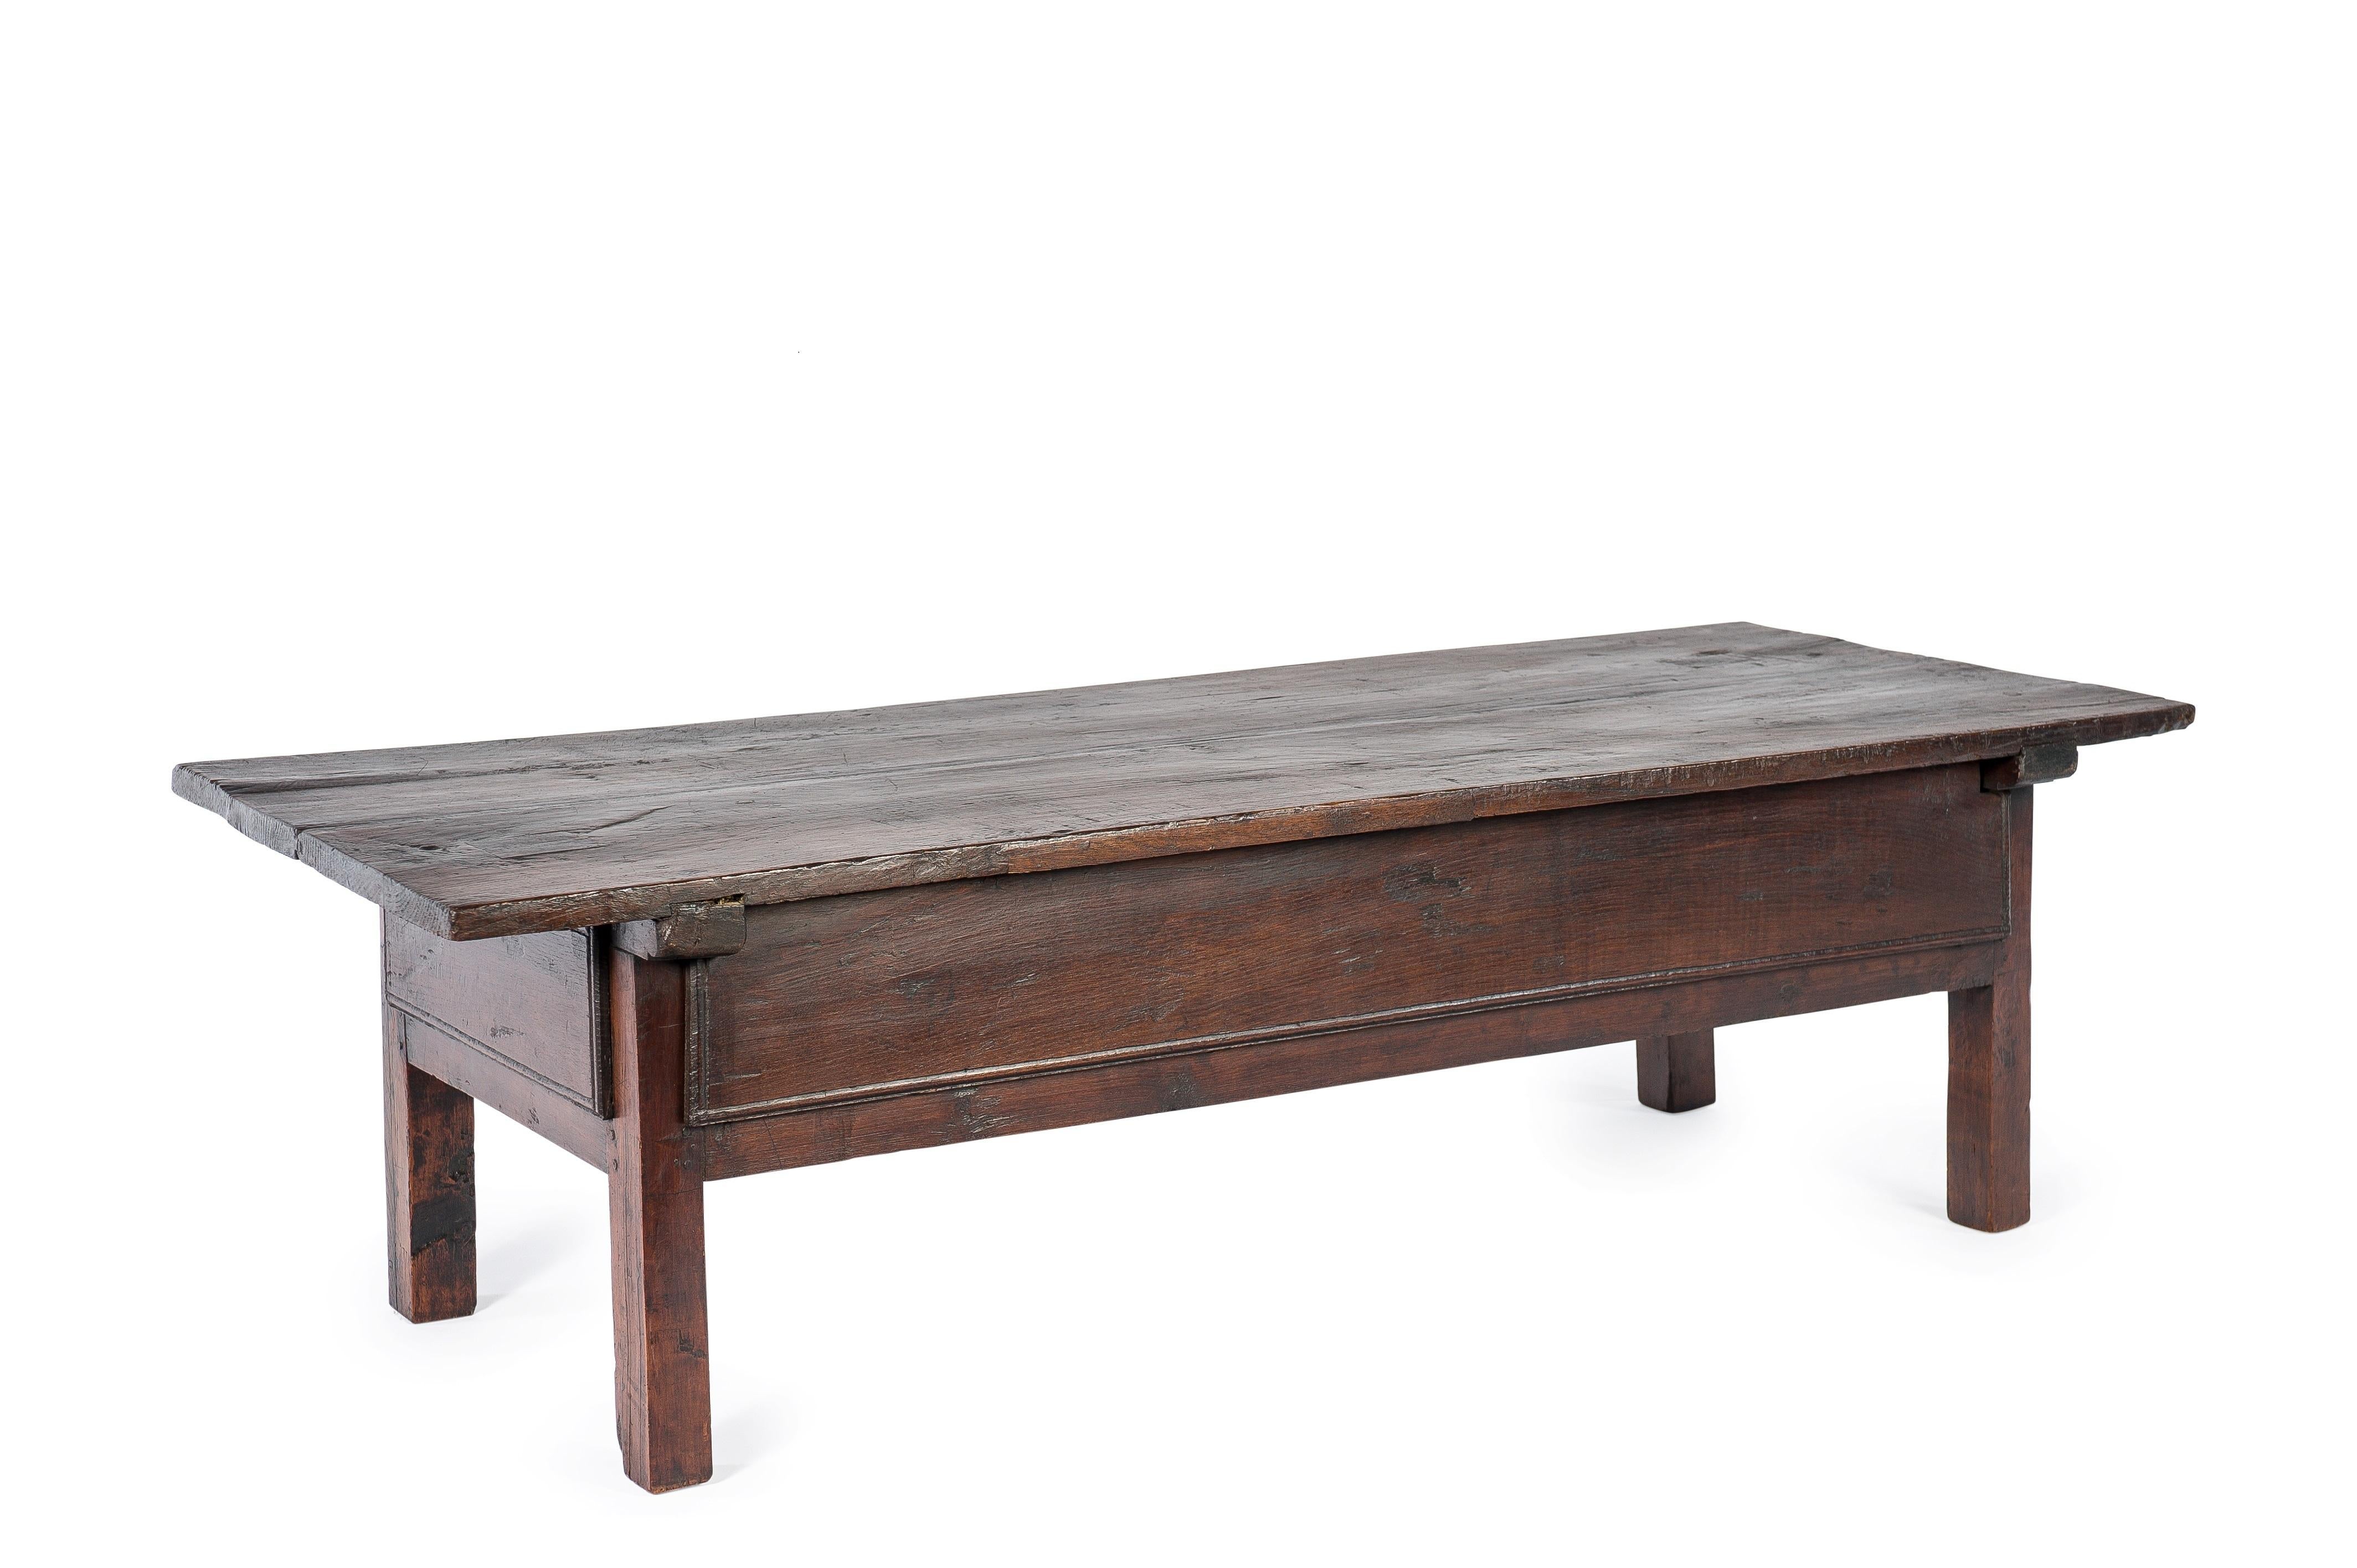 This beautiful dark brown rural coffee table or low table originates in Spain and dates circa 1760. 
The table has a beautiful top that was made from two boards of solid chestnut wood. The top has a beautiful patina and shows the many marks of use